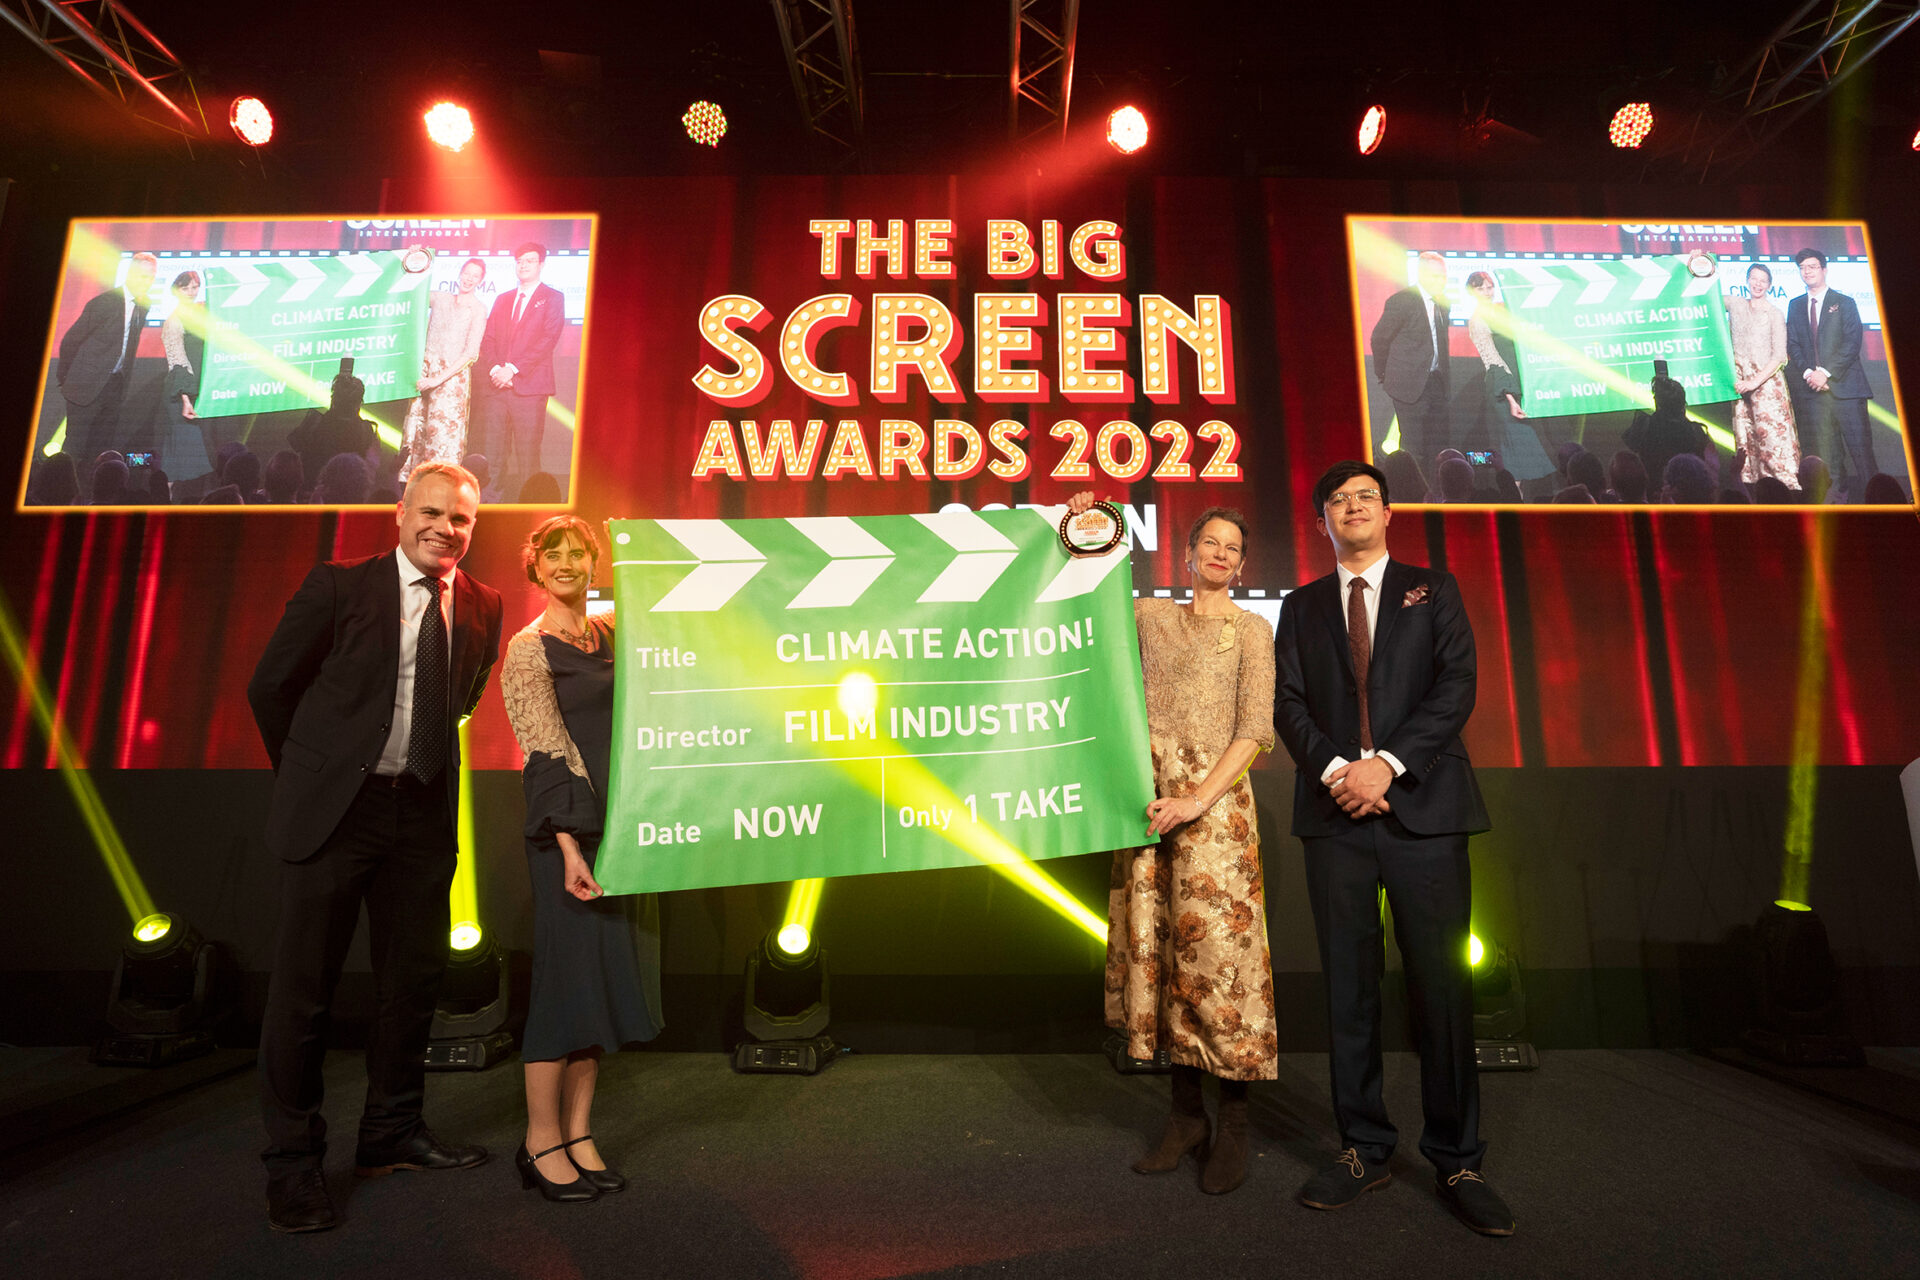 It's official! Depot is the winner of the Green Screen Award at this year's Big Screen Awards